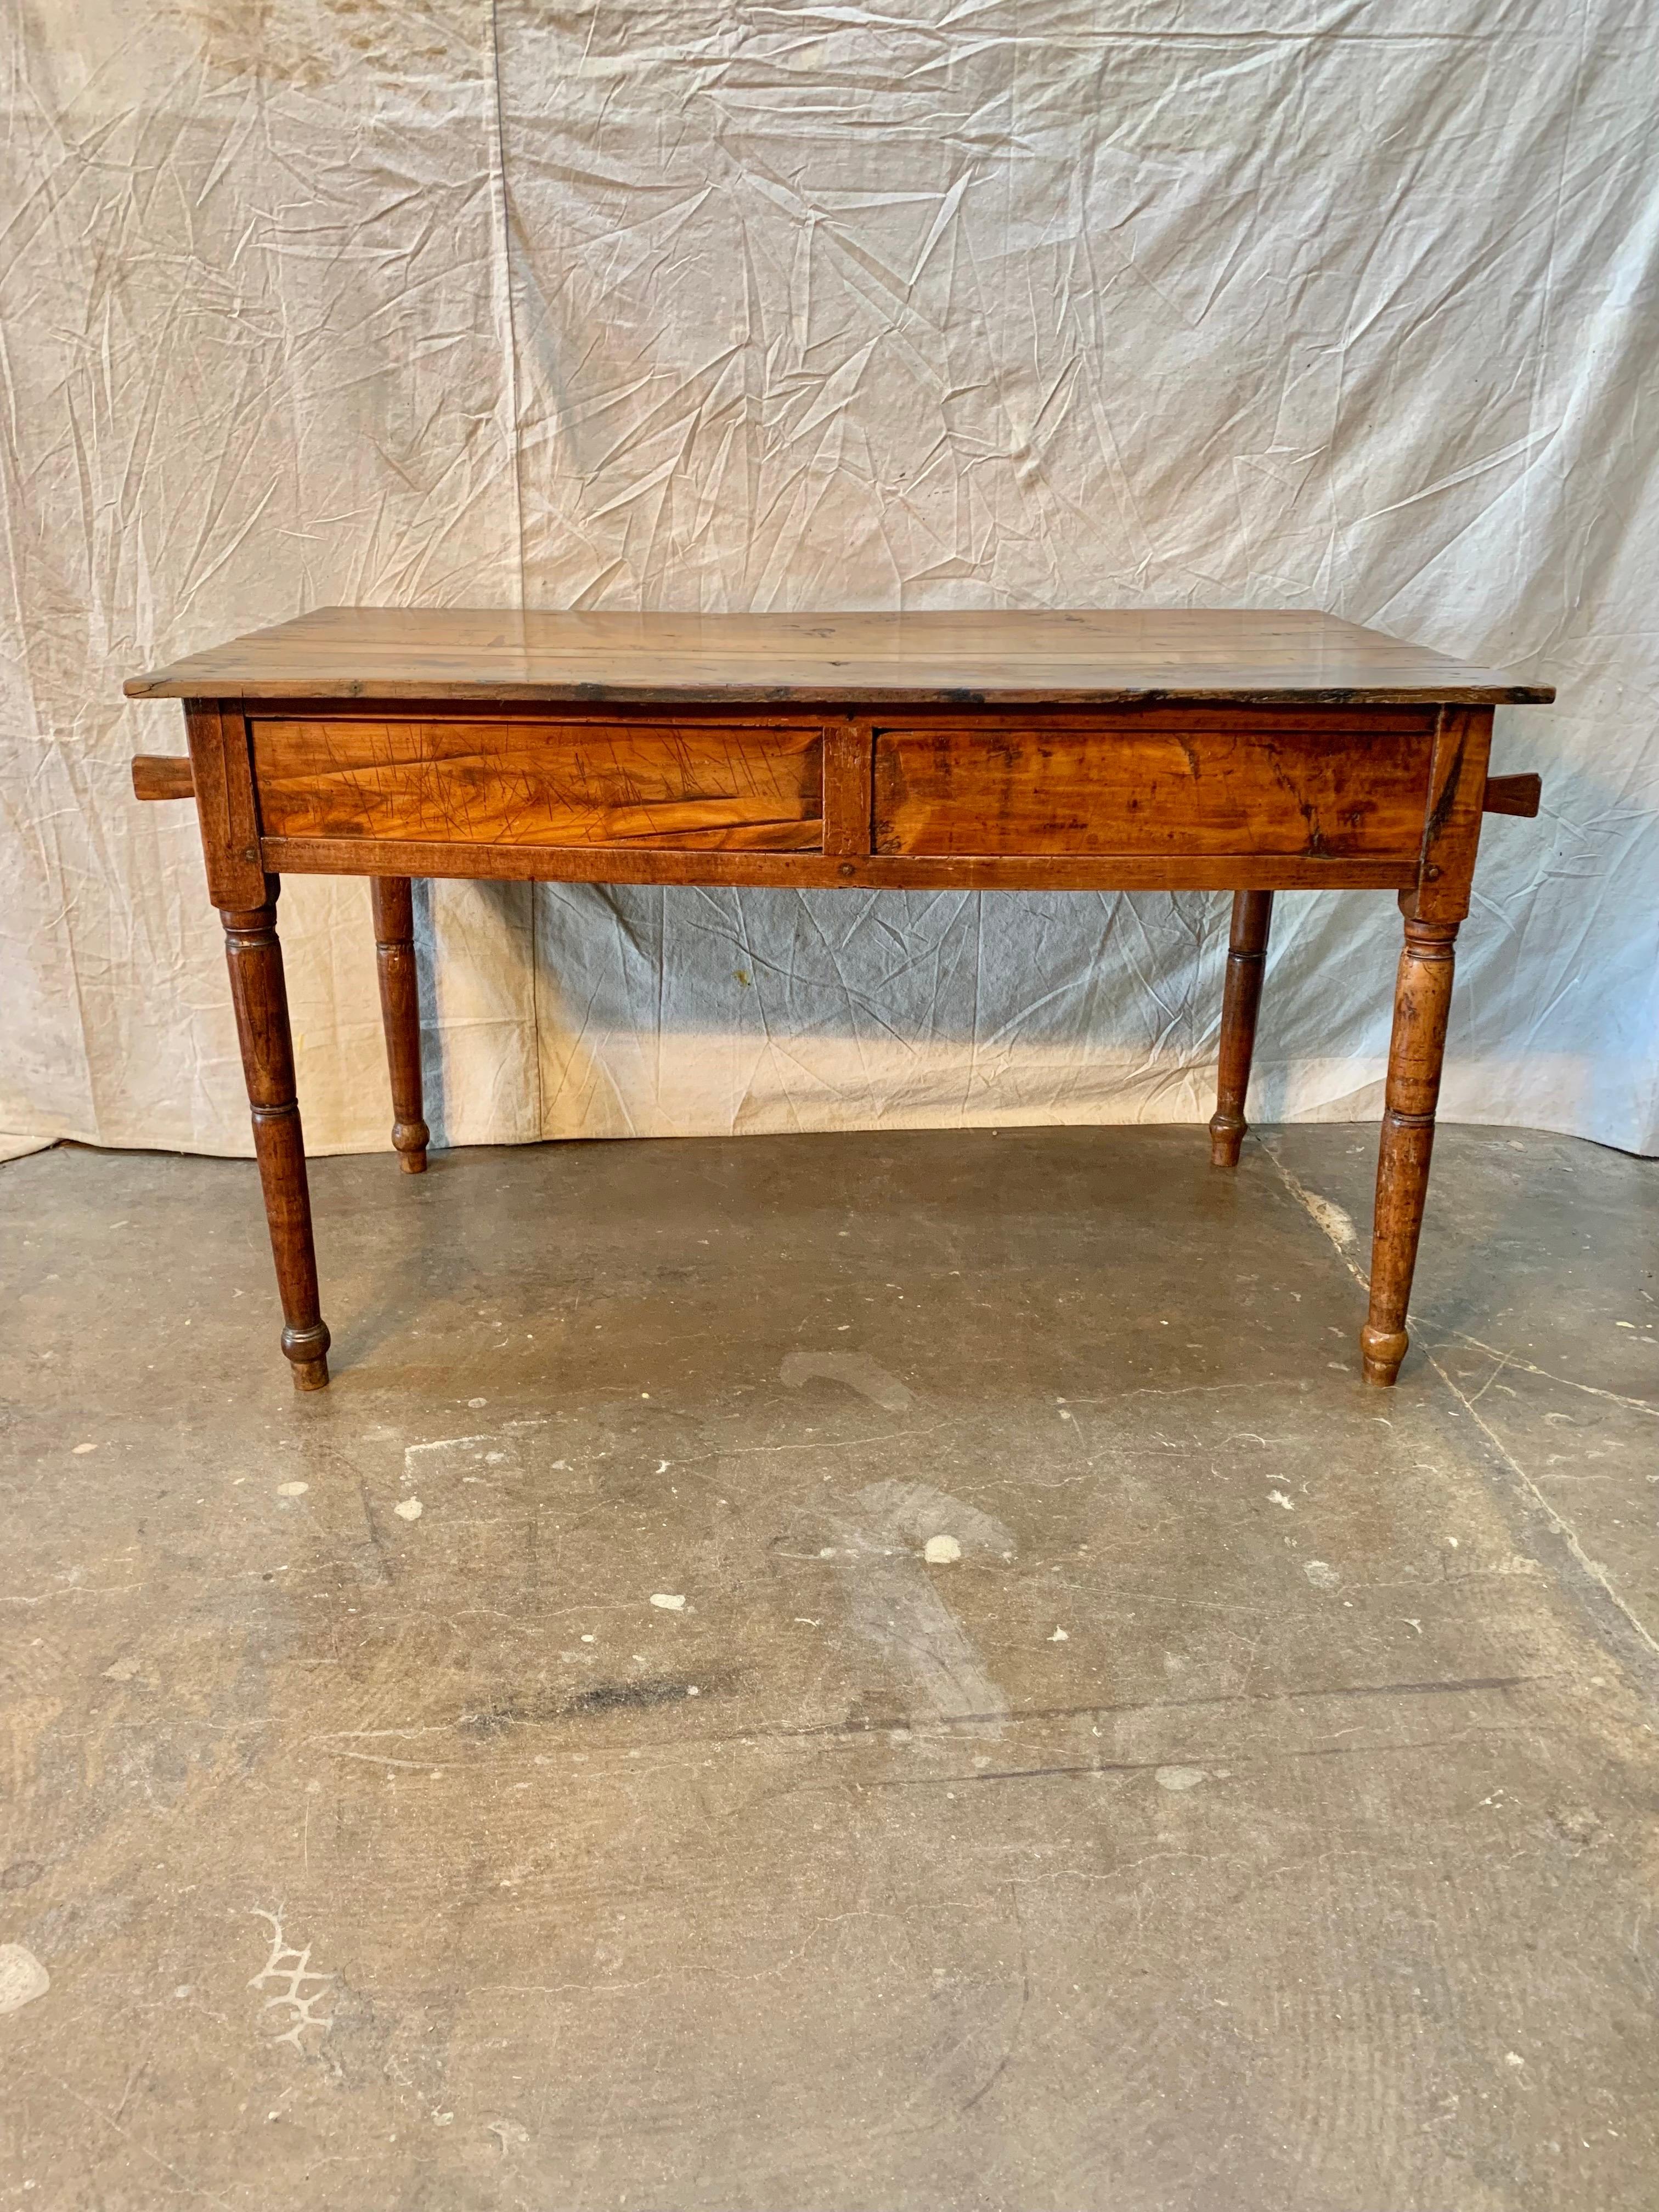 Found in the South of France this French farm table was hand crafted of old growth walnut and features two removable sliding panels which slide in opposite directions to reveal a storage space. The panels were once used as a cutting board to slice